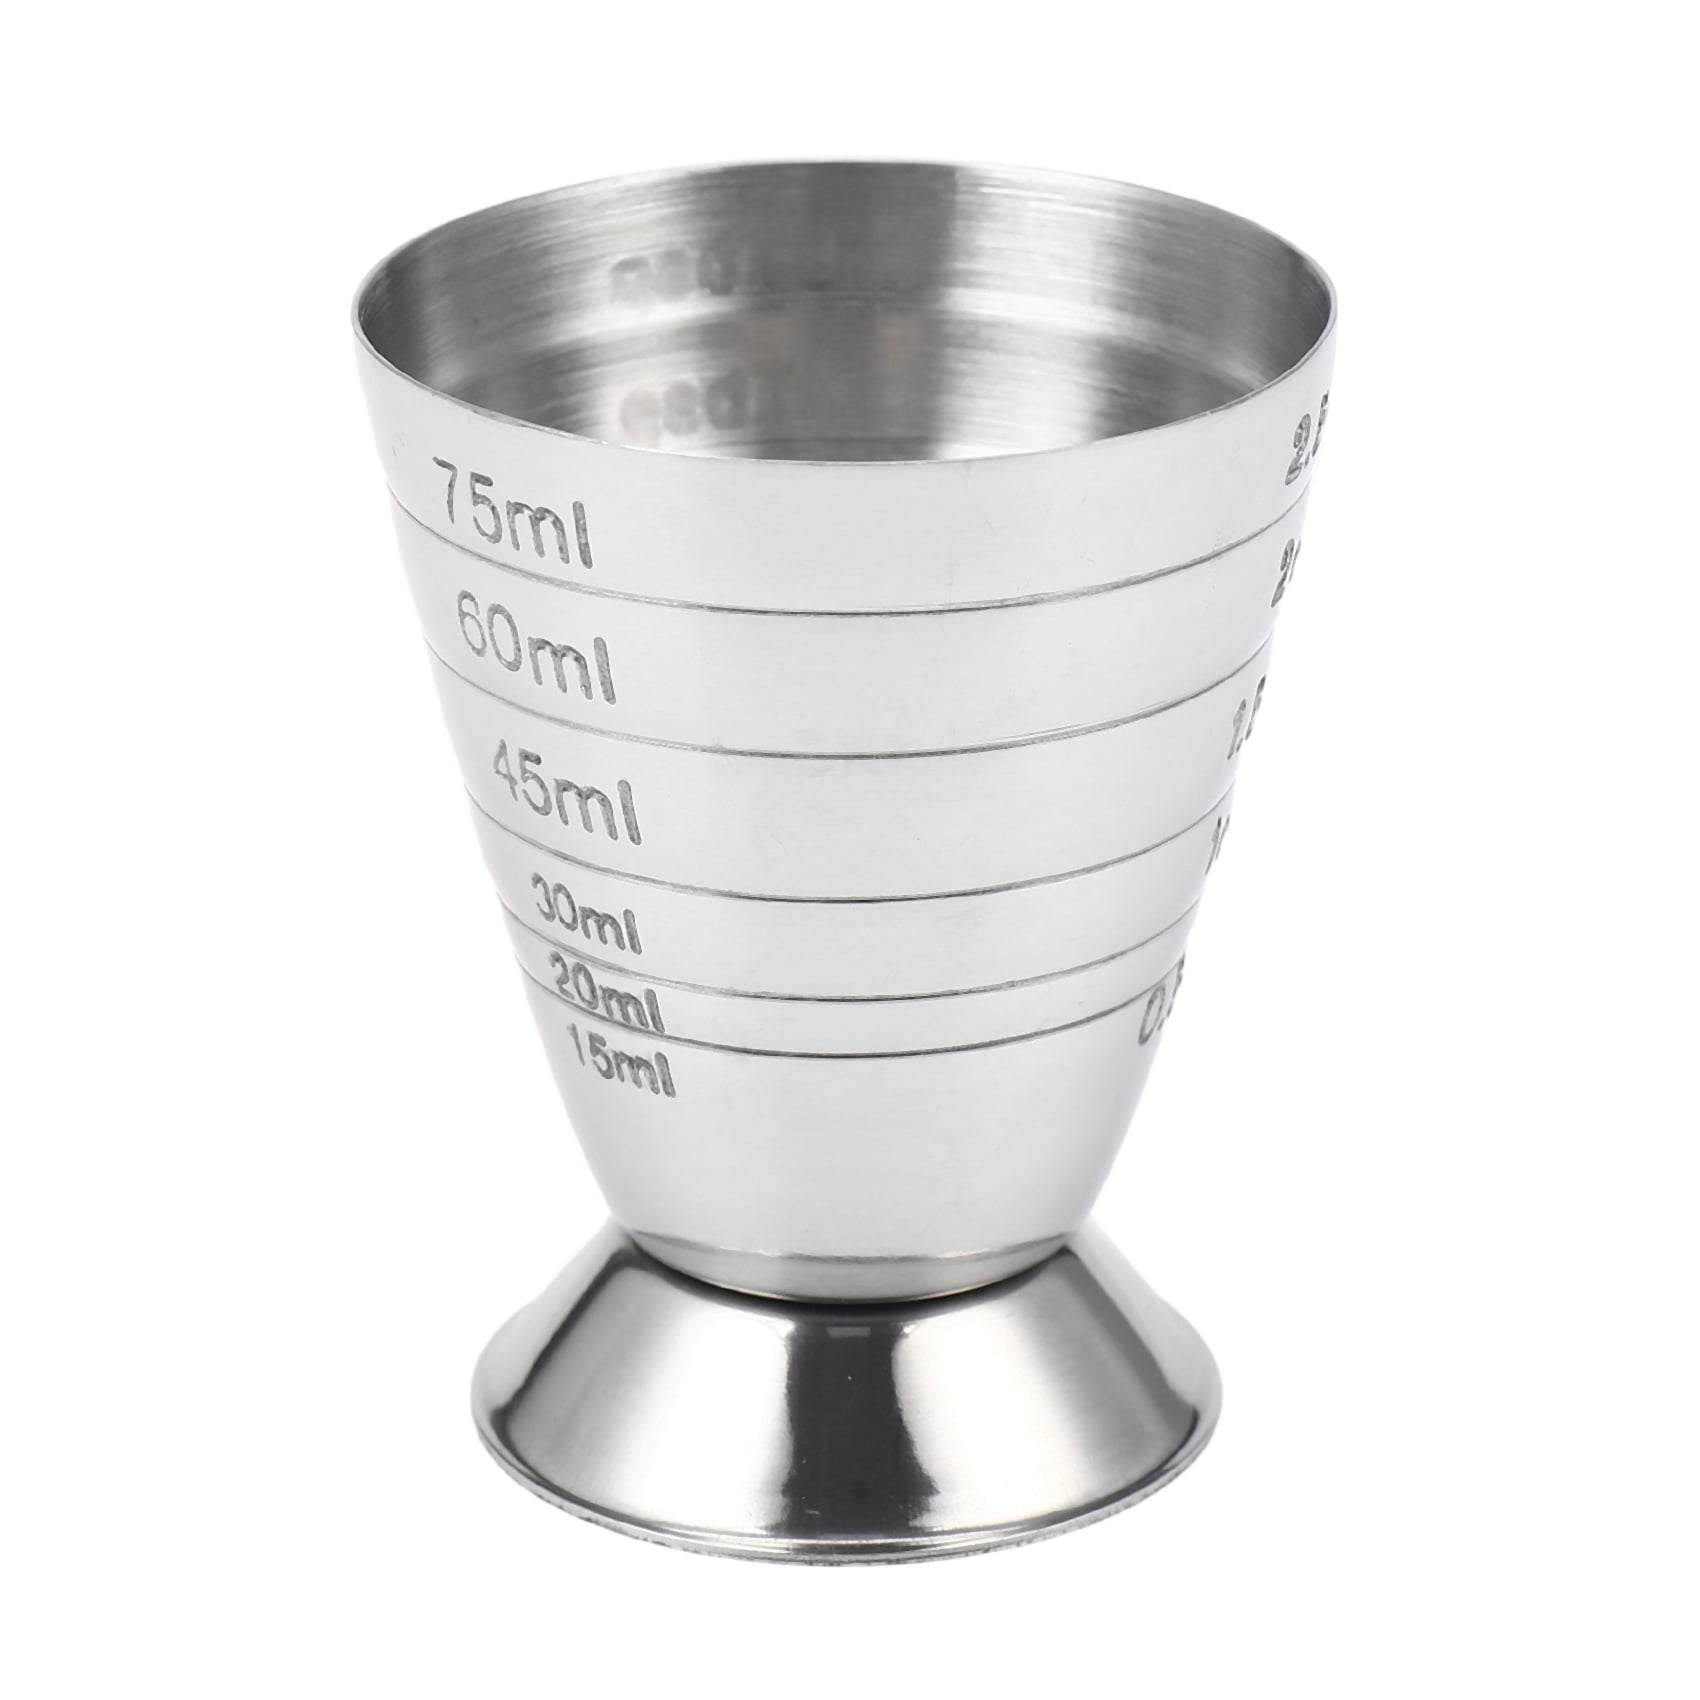 Magideal Measuring Cup Cocktail Jigger Mixing Measuring Cup for Club Party Home , Black, Size: 6X6X8.7CM